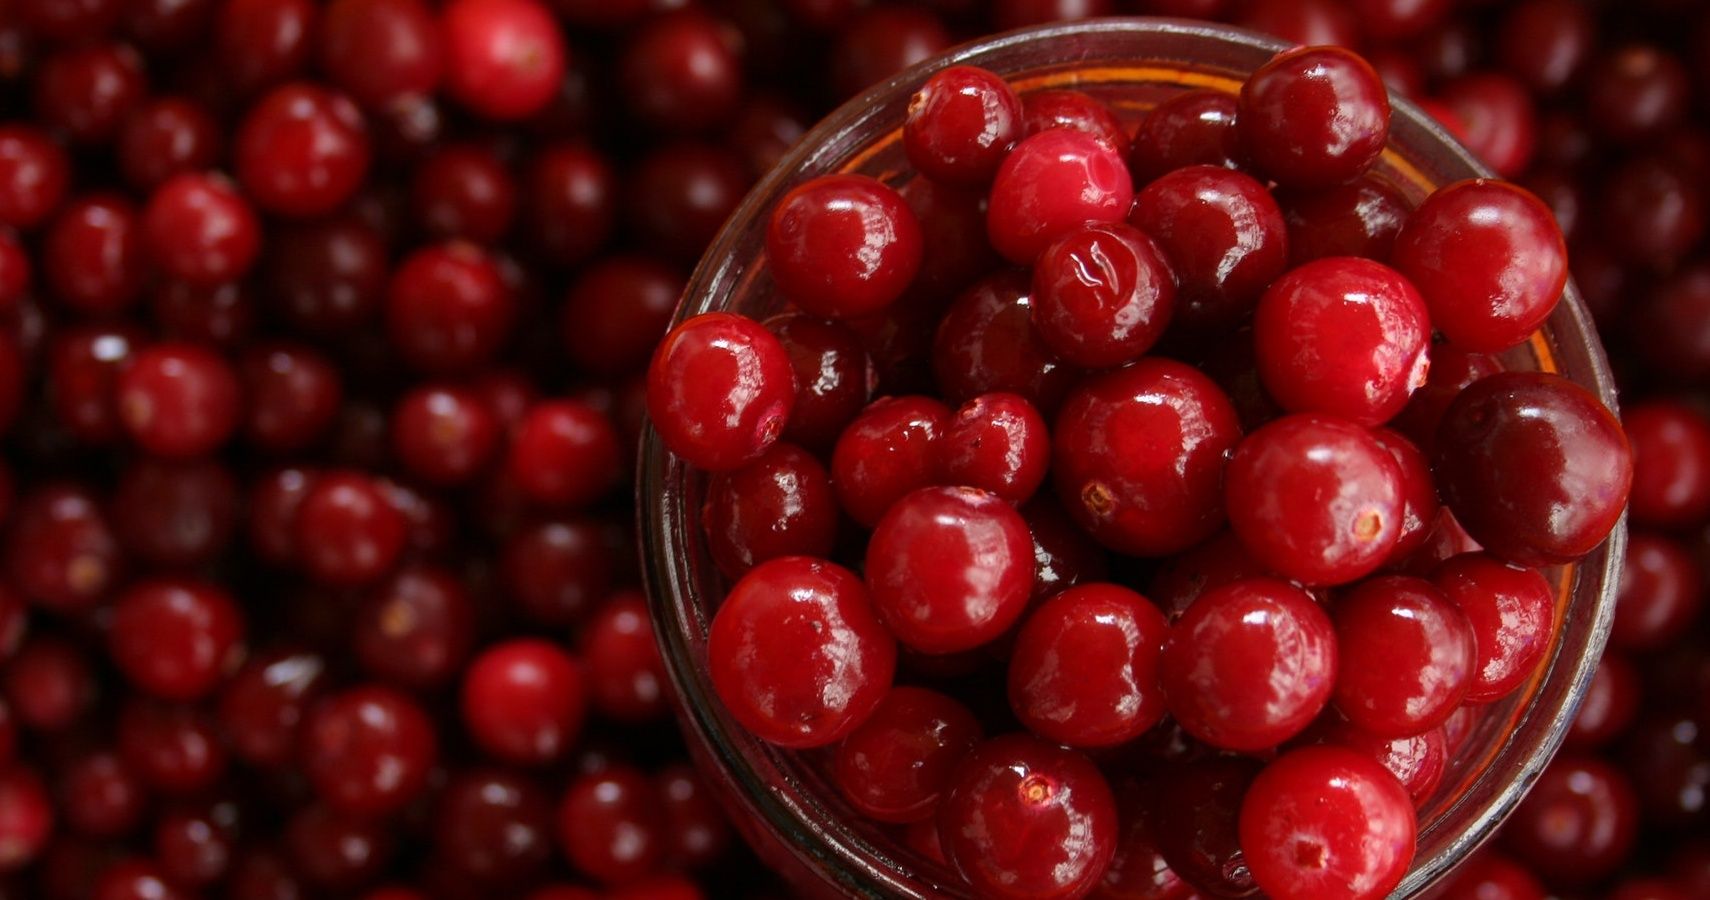 Eating cranberries during pregnancy